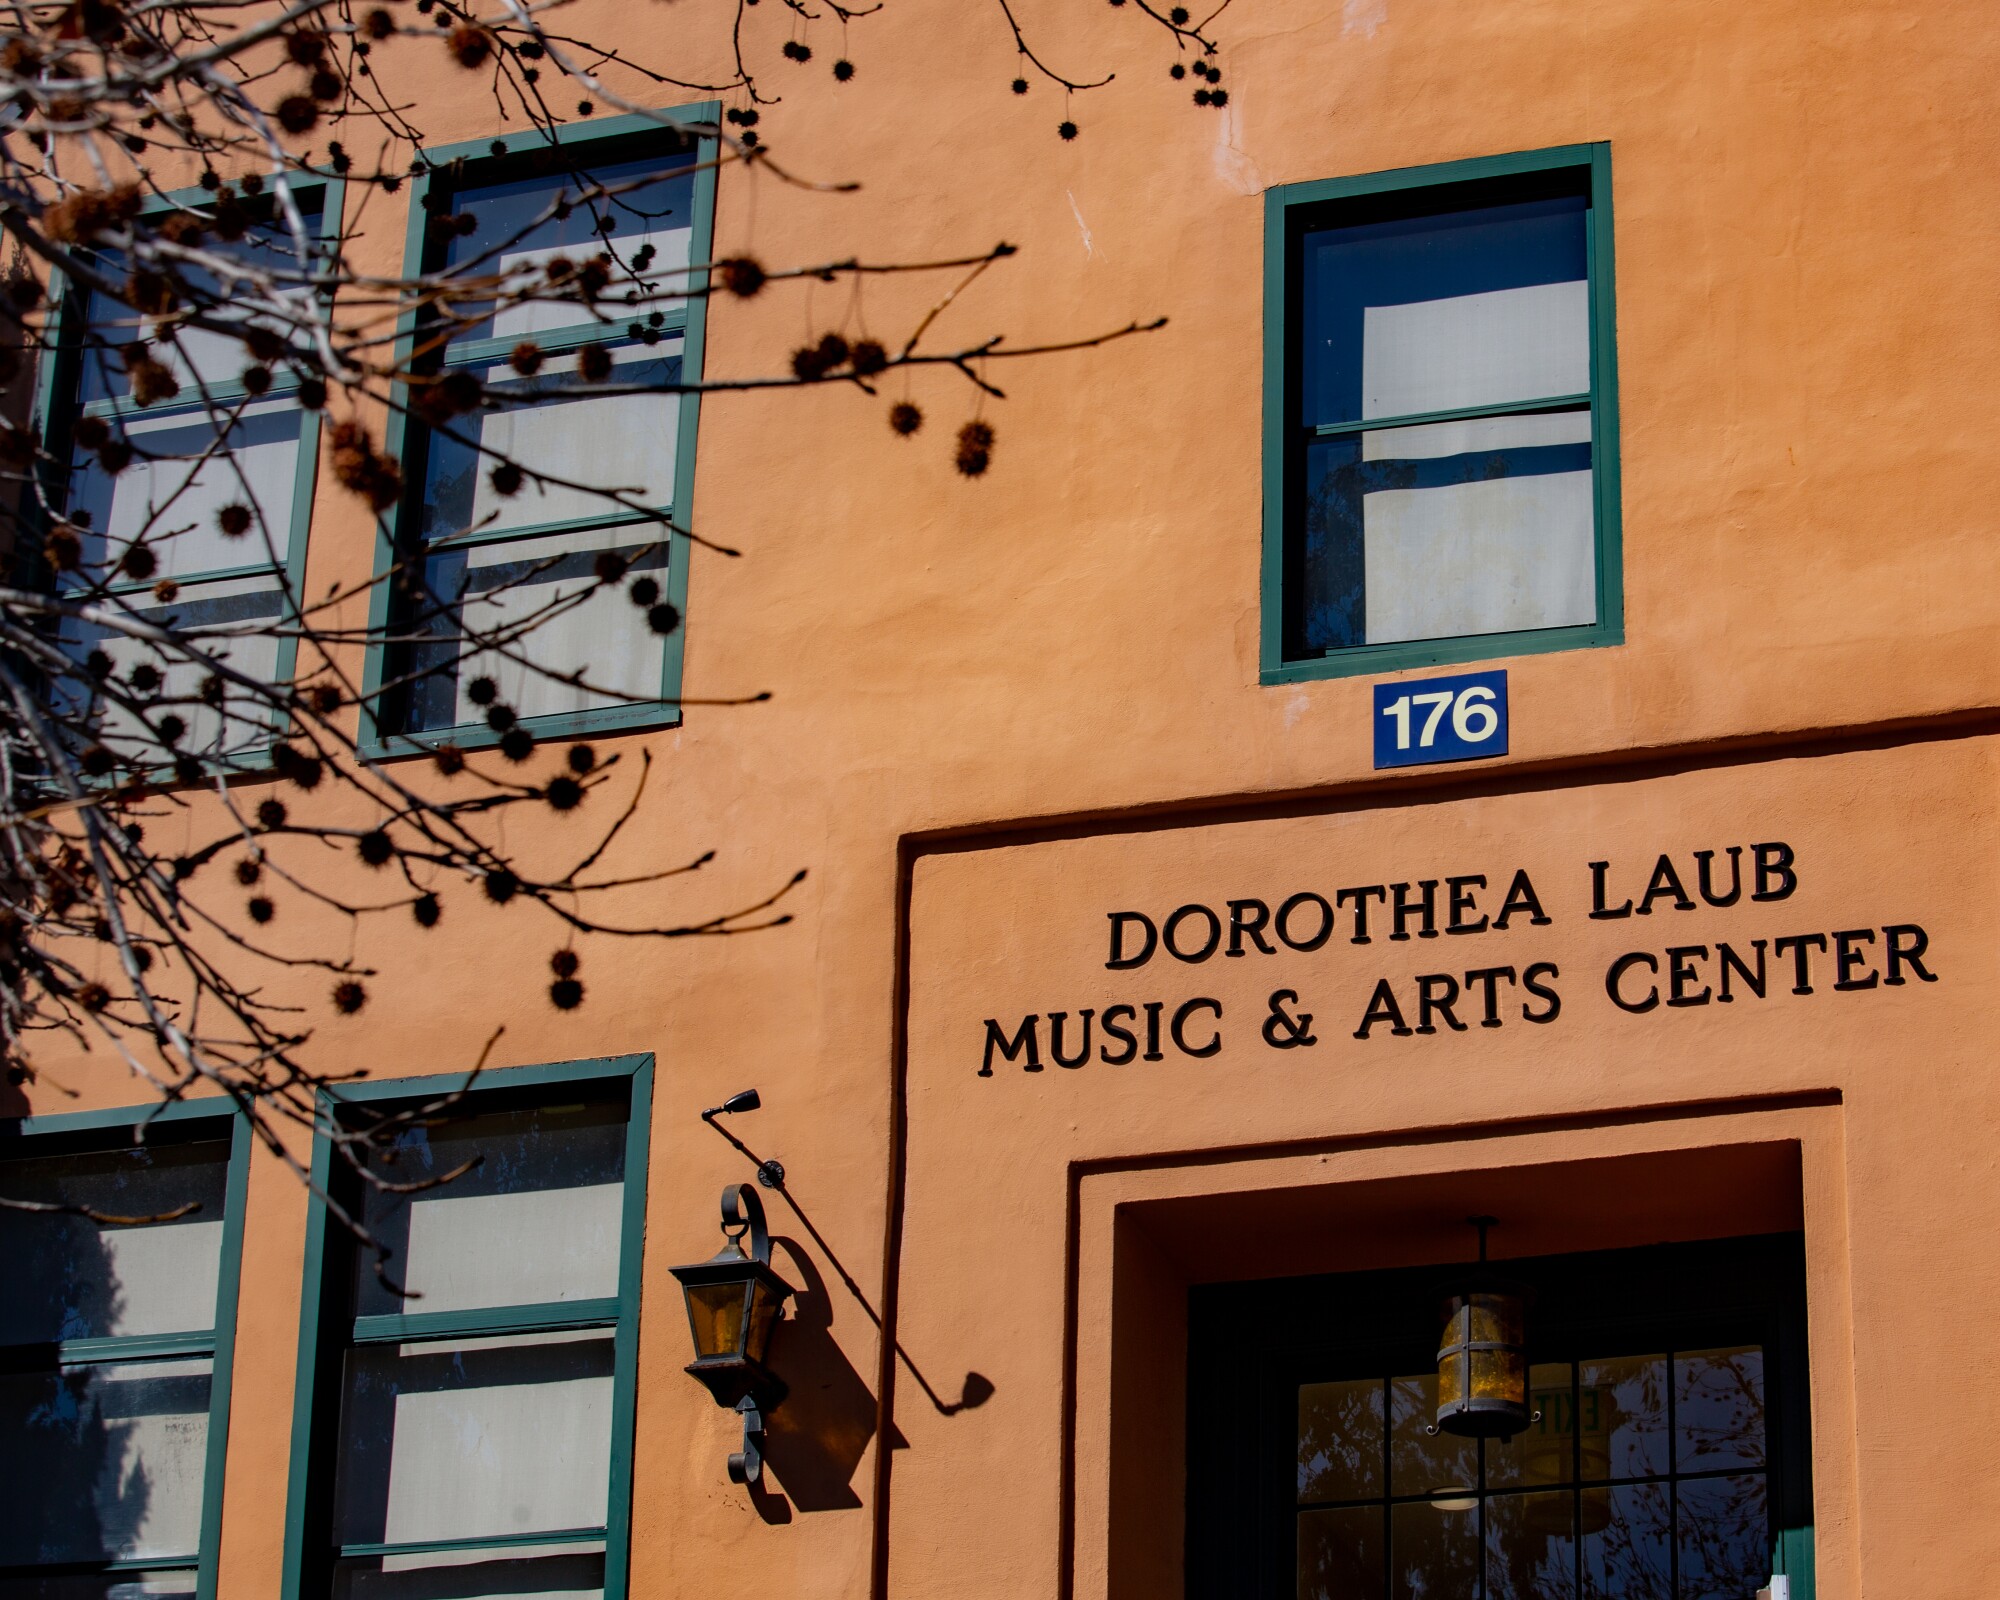 Liberty Station's Dorothea Laub Music & Arts Center is home to the San Diego Dance Theater.